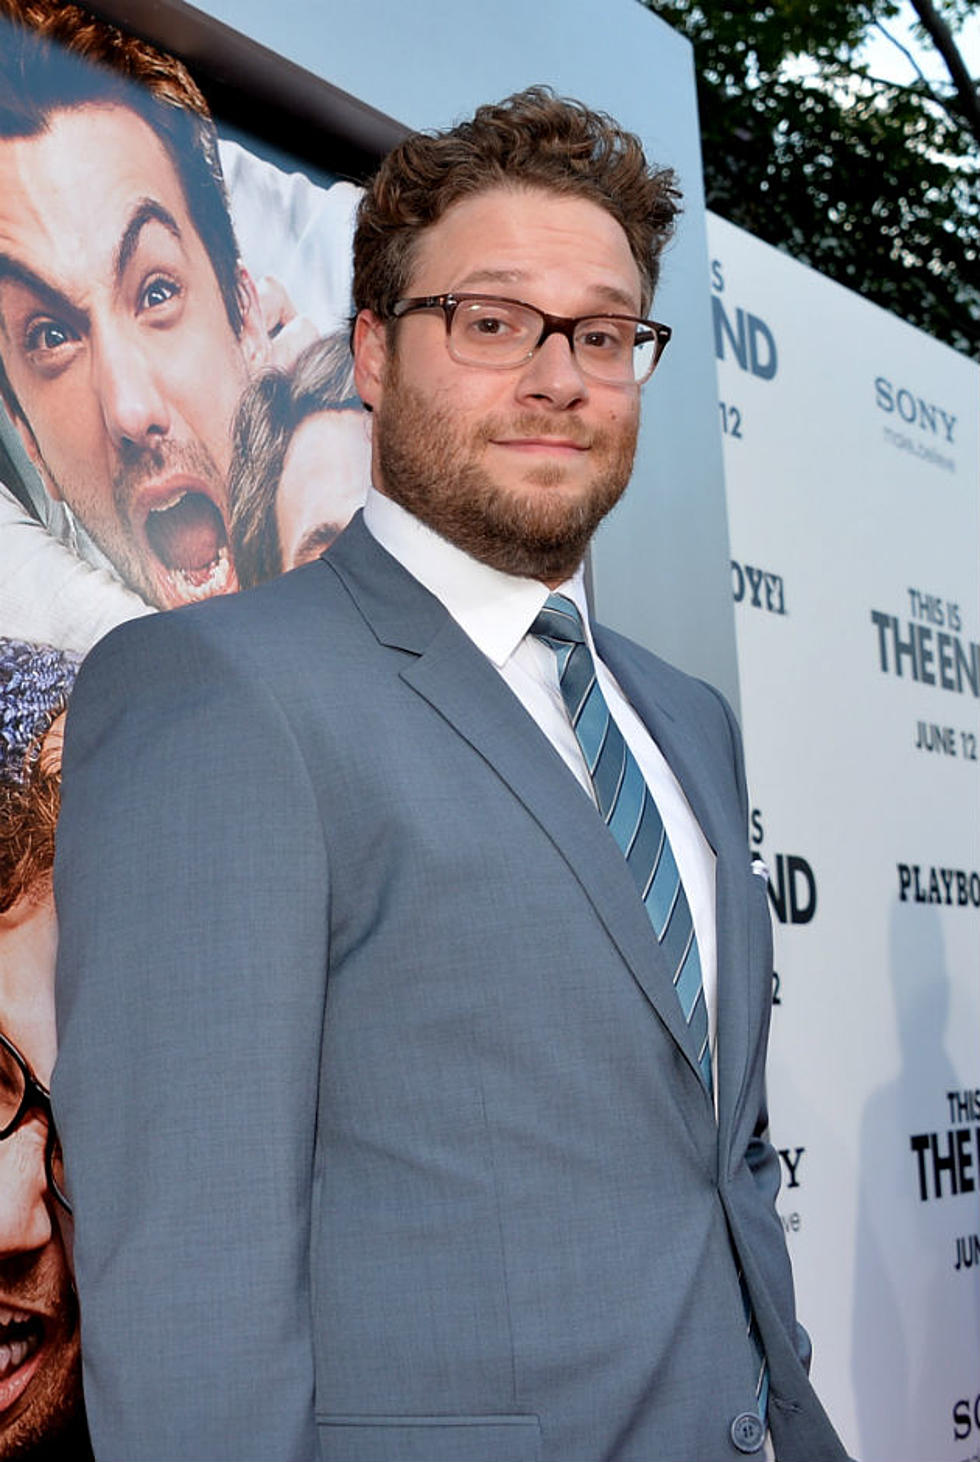 Seth Rogen Gives Touching Opening Statement on Alzheimer’s Disease Before Senate